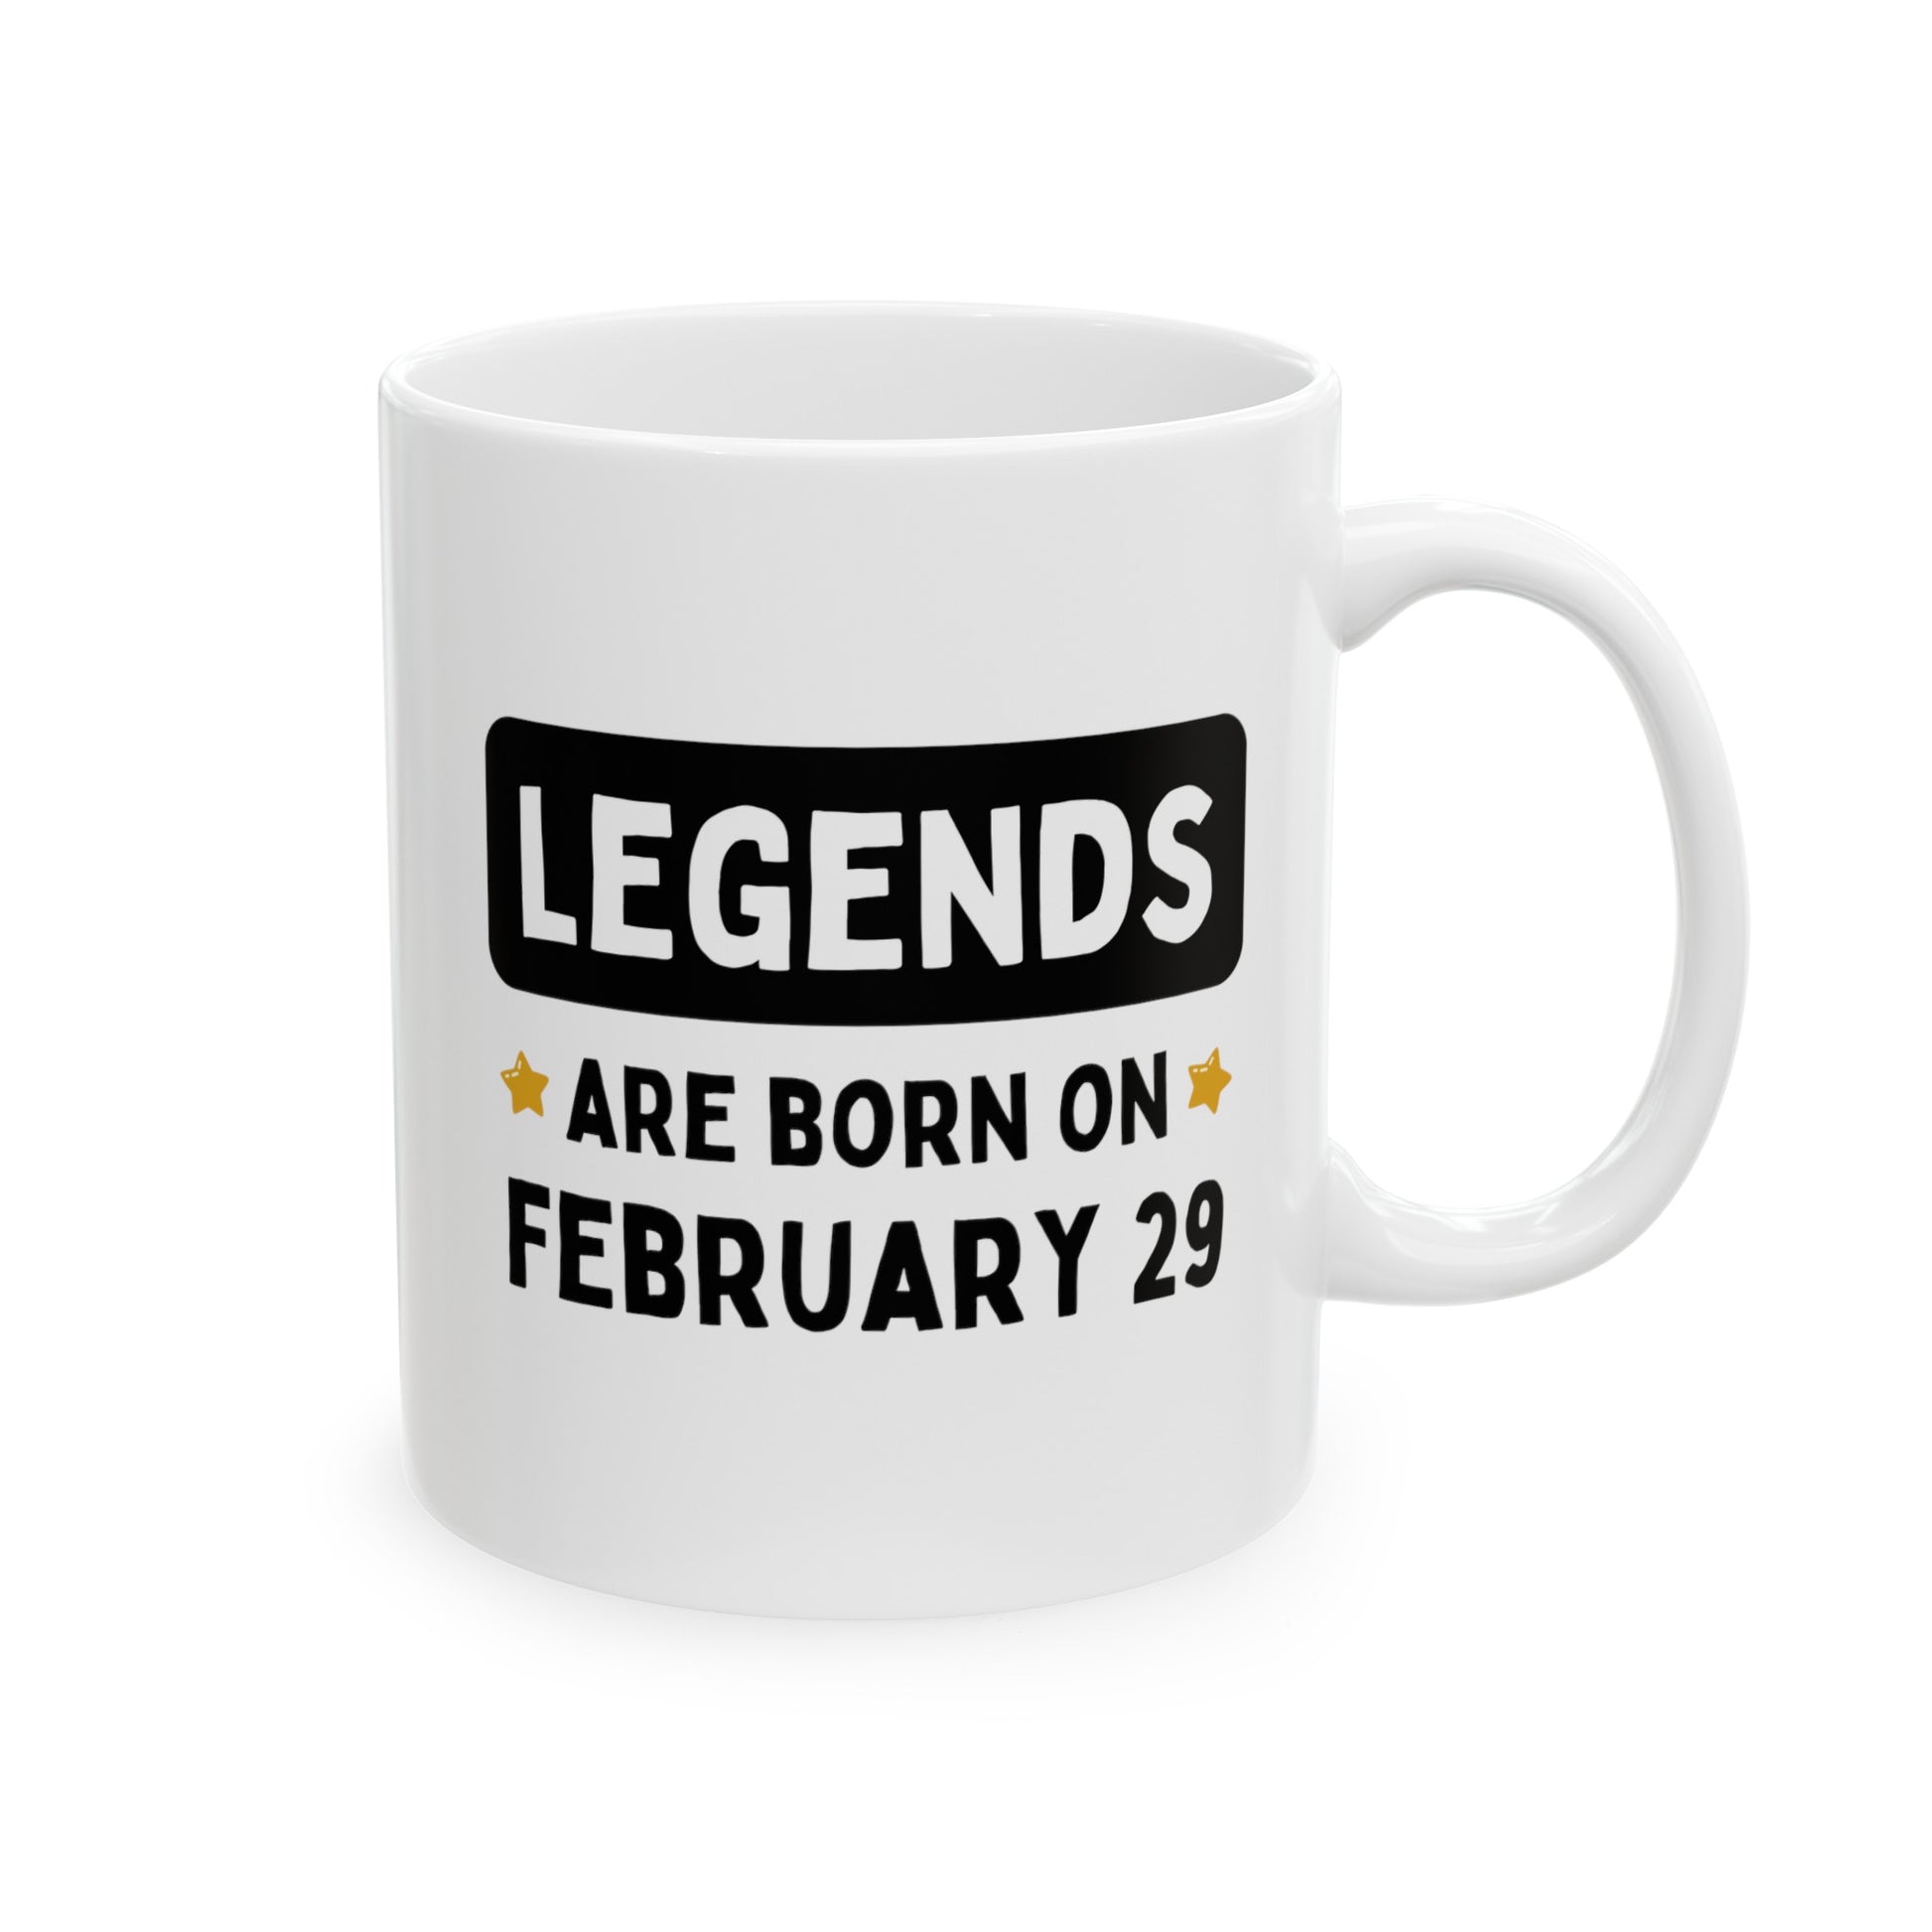 Legends are Born on February 29 11oz white funny large coffee mug gift for leap year custom birthday date him her best friend personalized waveywares wavey wares wavywares wavy wares